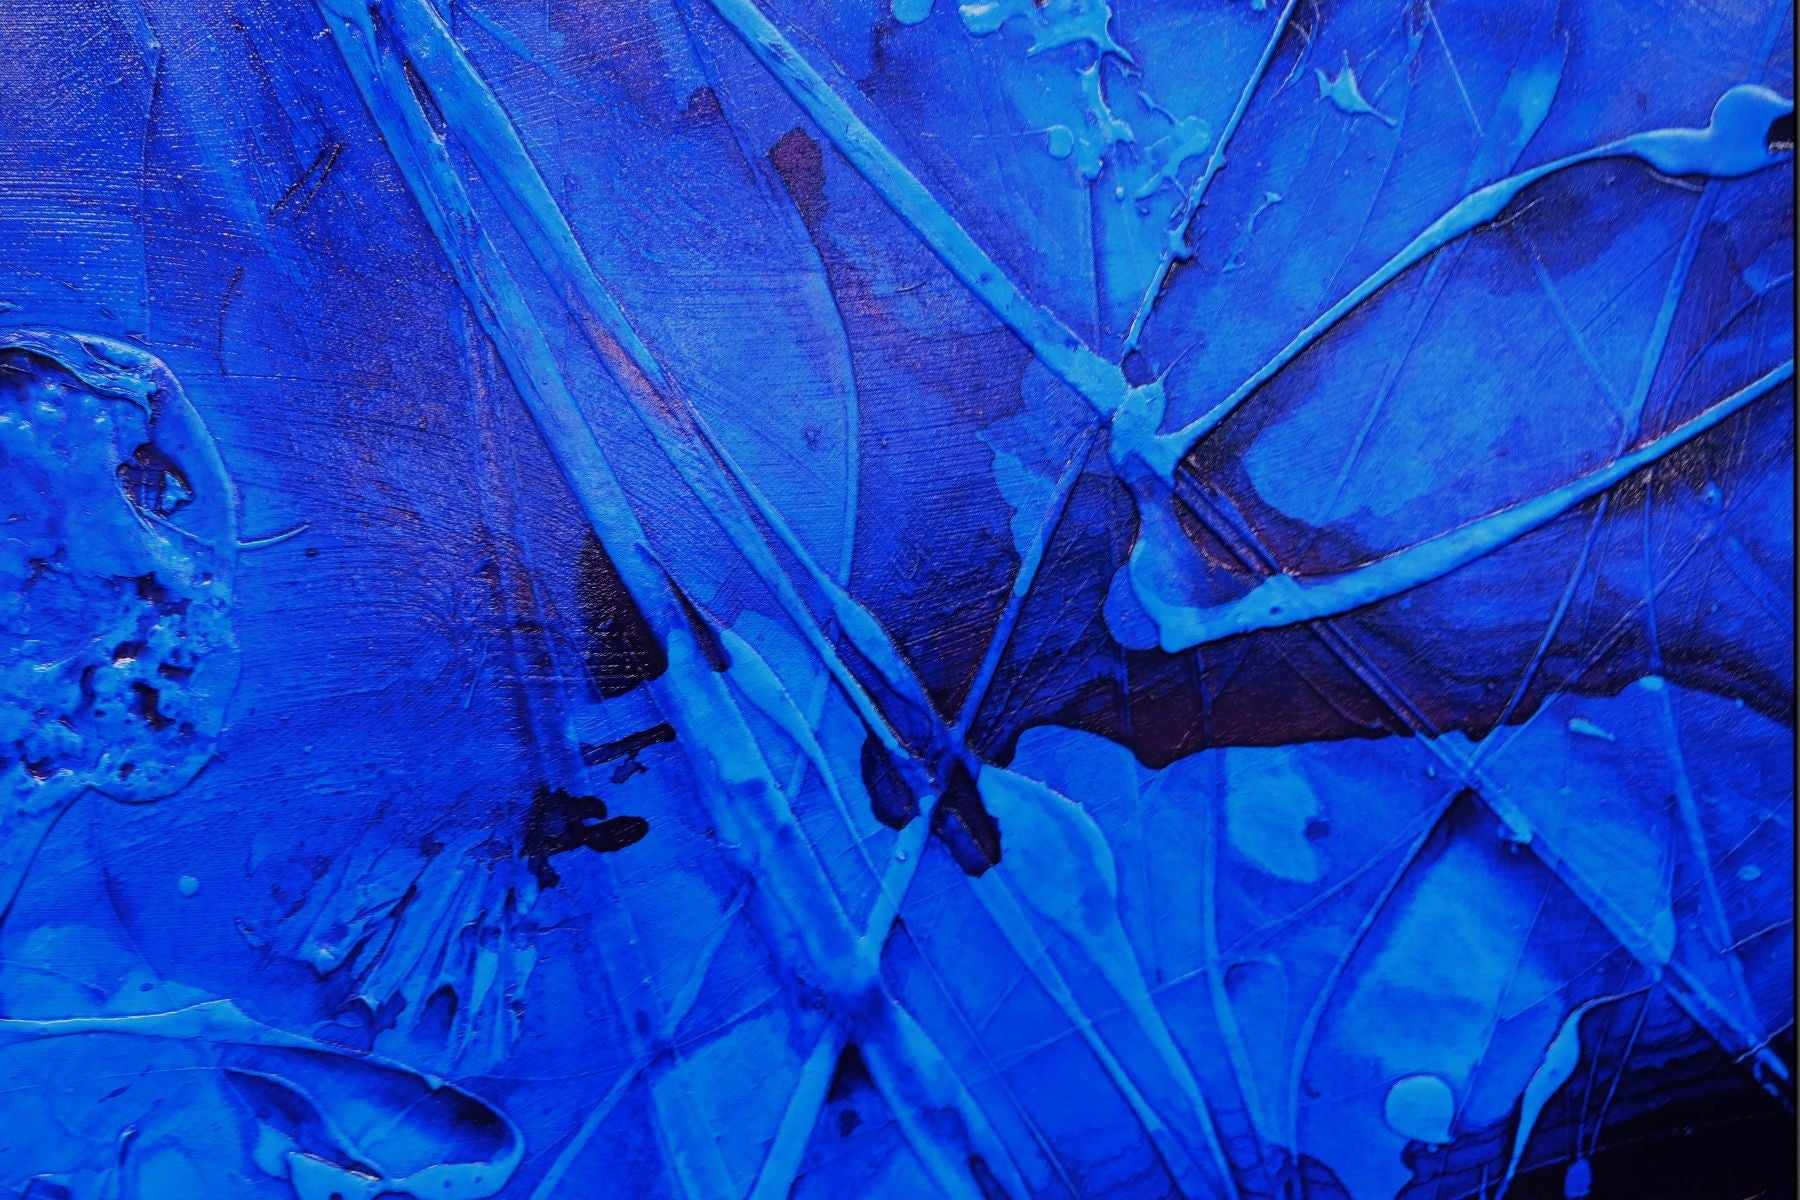 Inked Euphoria 270cm x 120cm Blue Ink Textured Abstract Painting (SOLD)